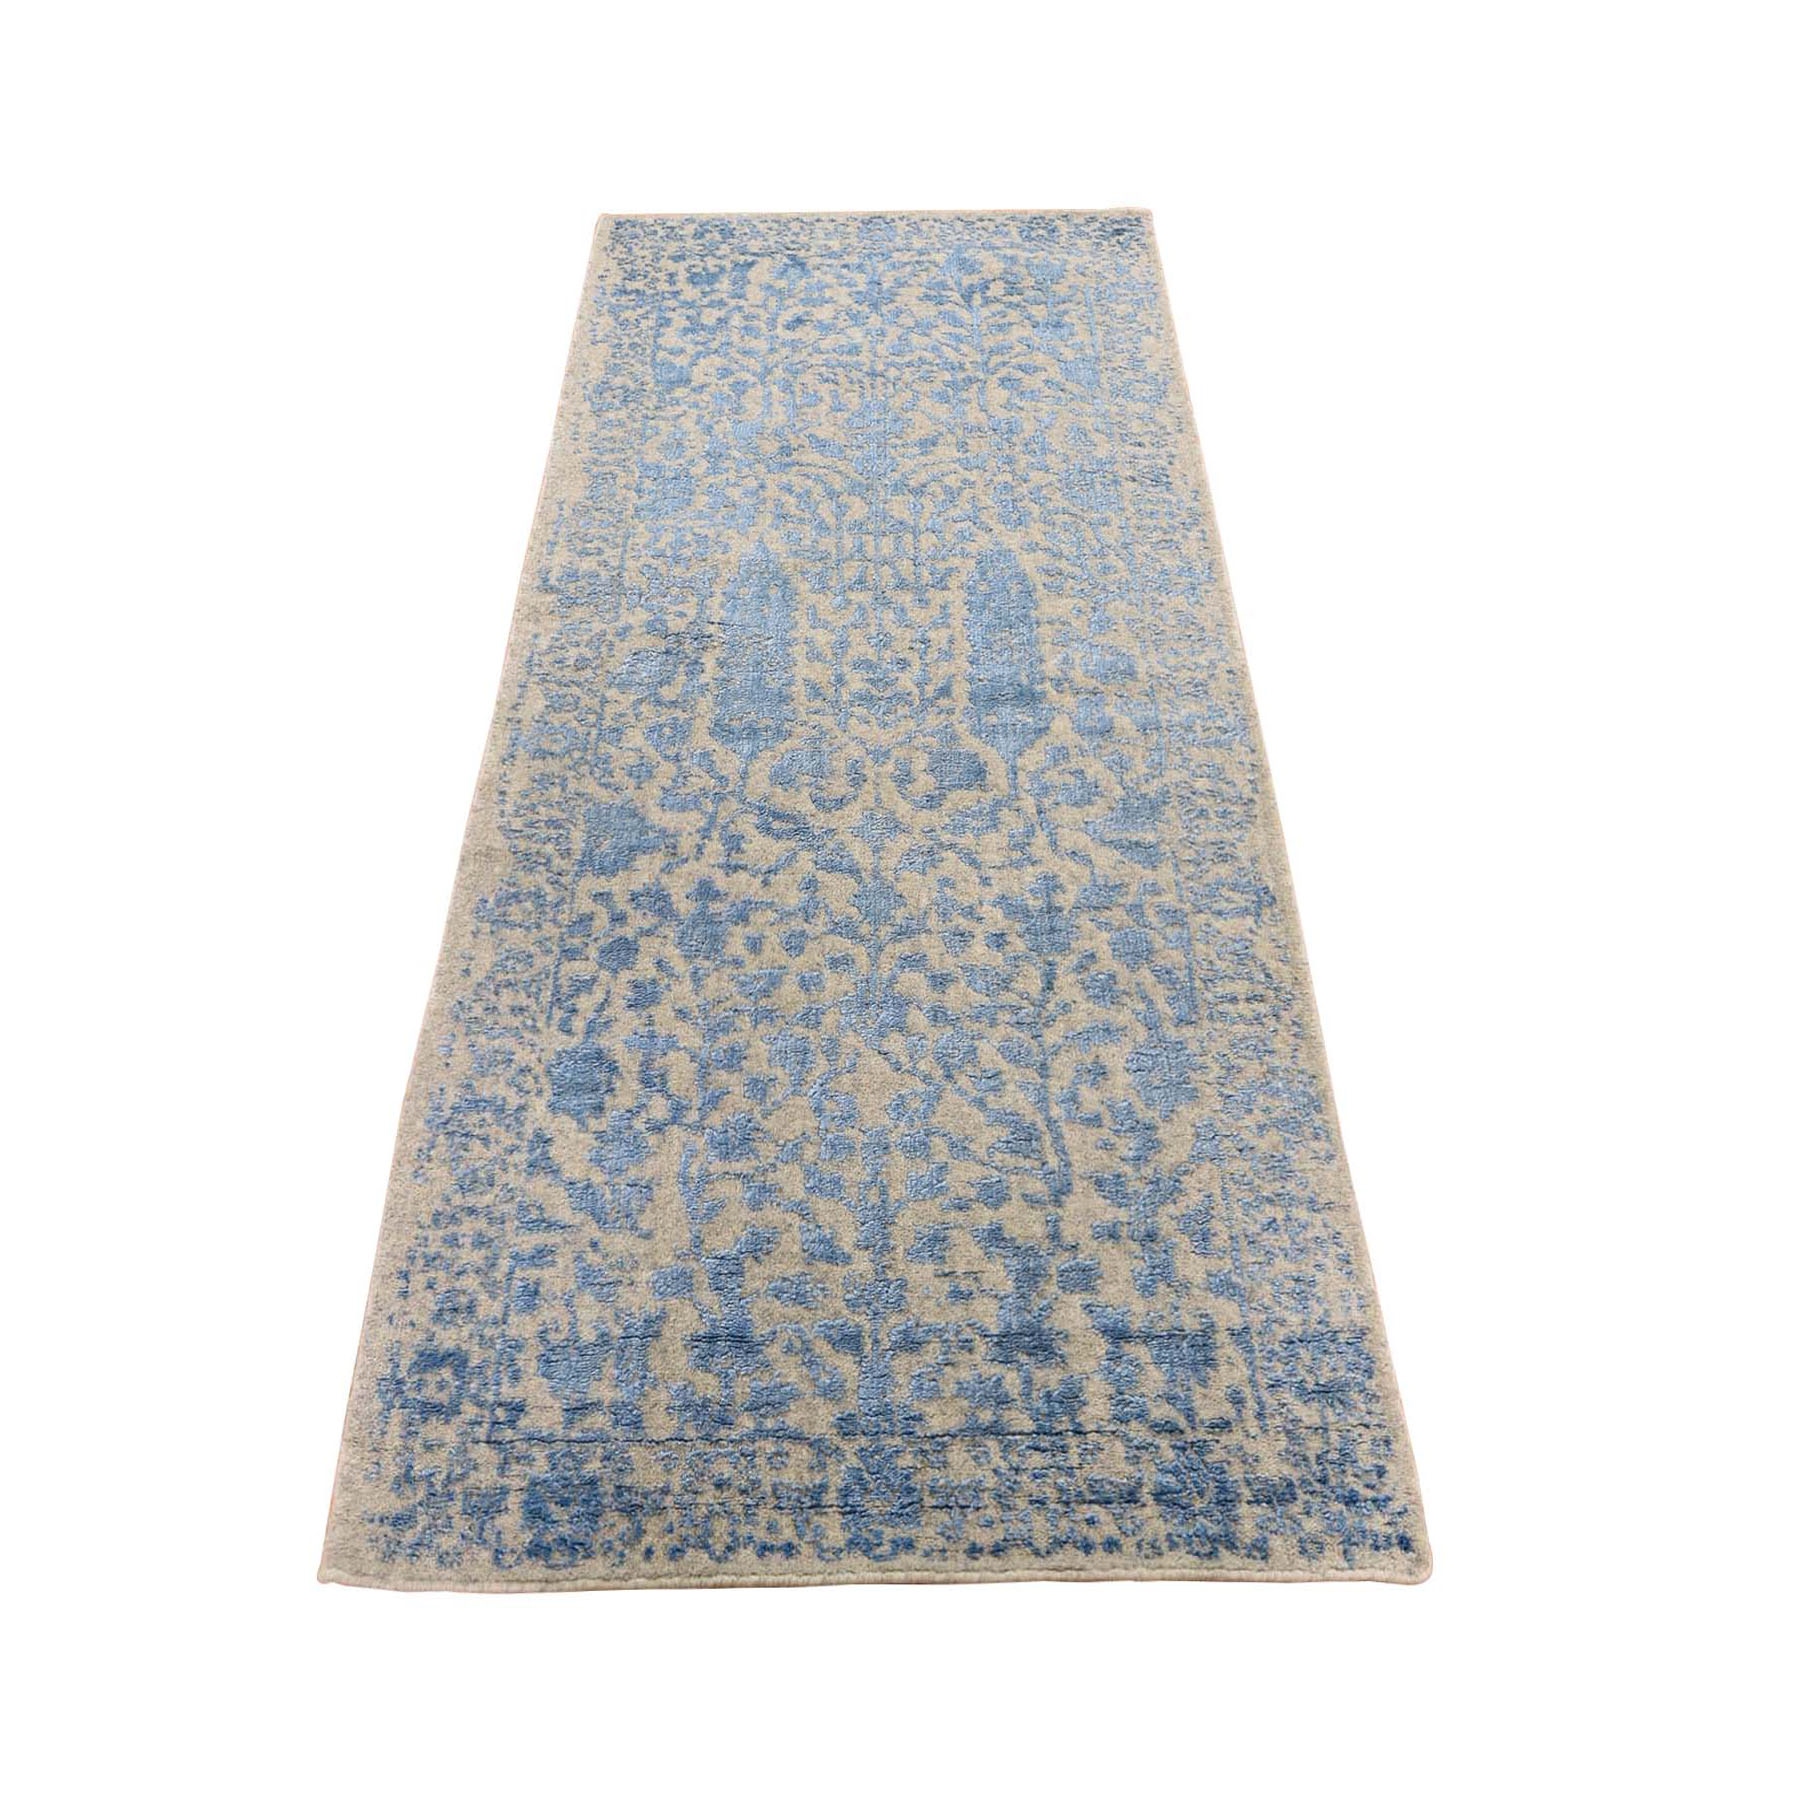 2'5"X6'2" Jacquard Hand Loomed Blue Broken Cypress Tree Design Silken Thick And Plush Runner Oriental Rug moad9ab8